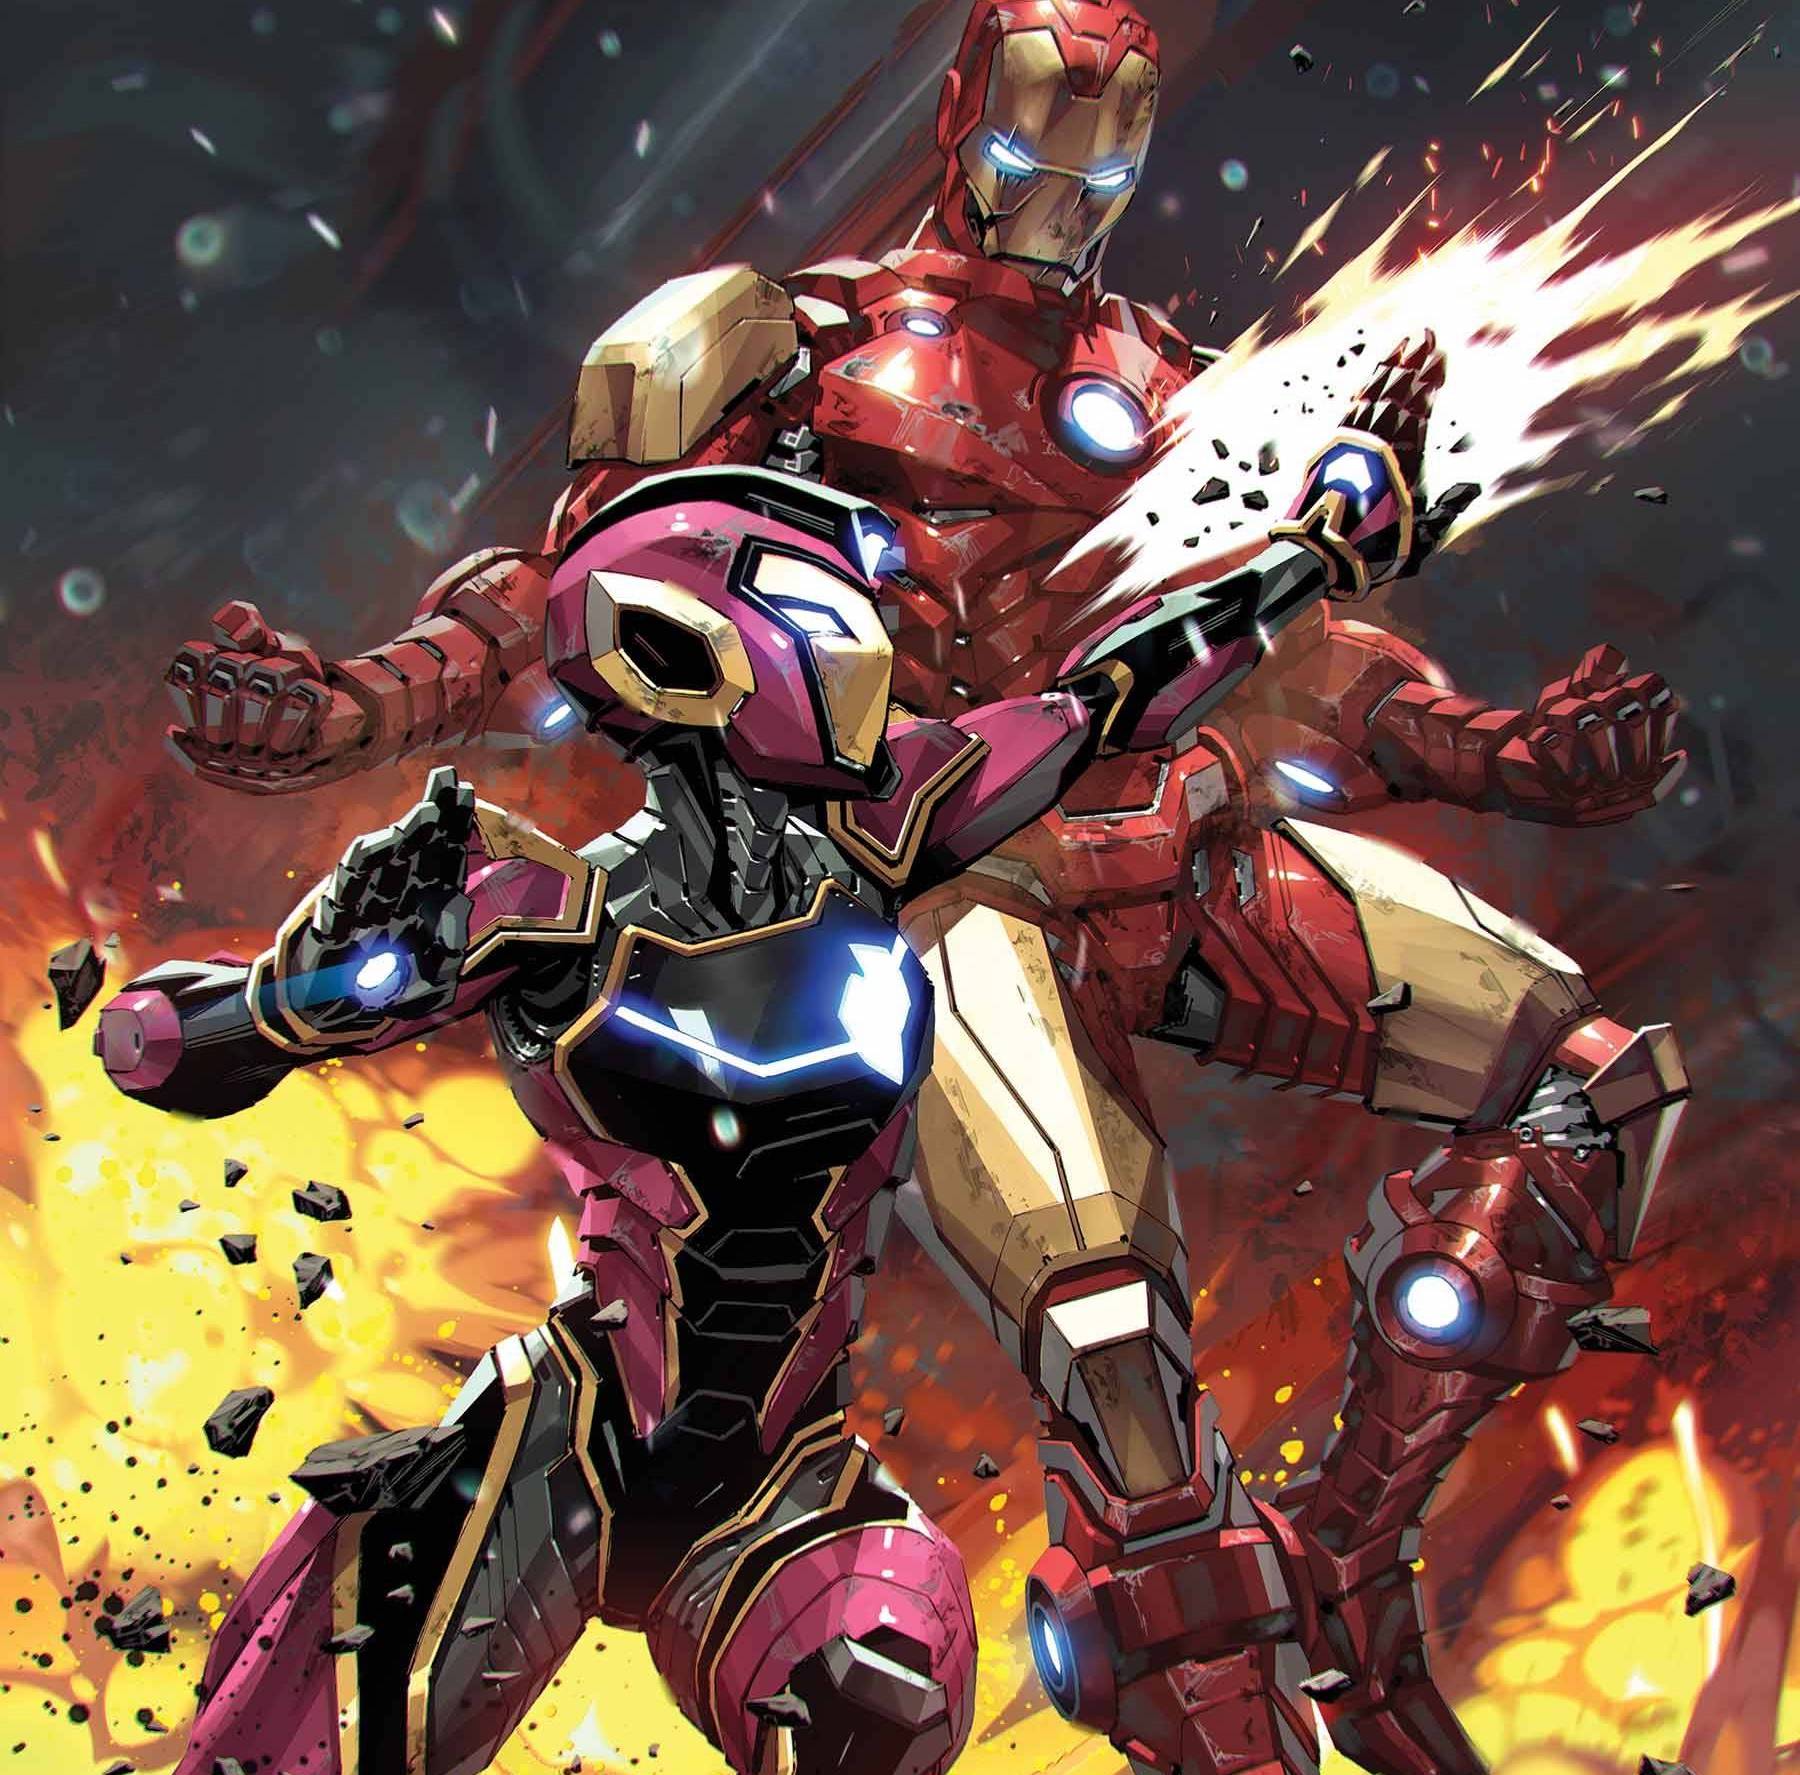 'Invincible Iron Man' #2 offers up a good Ironheart teamup